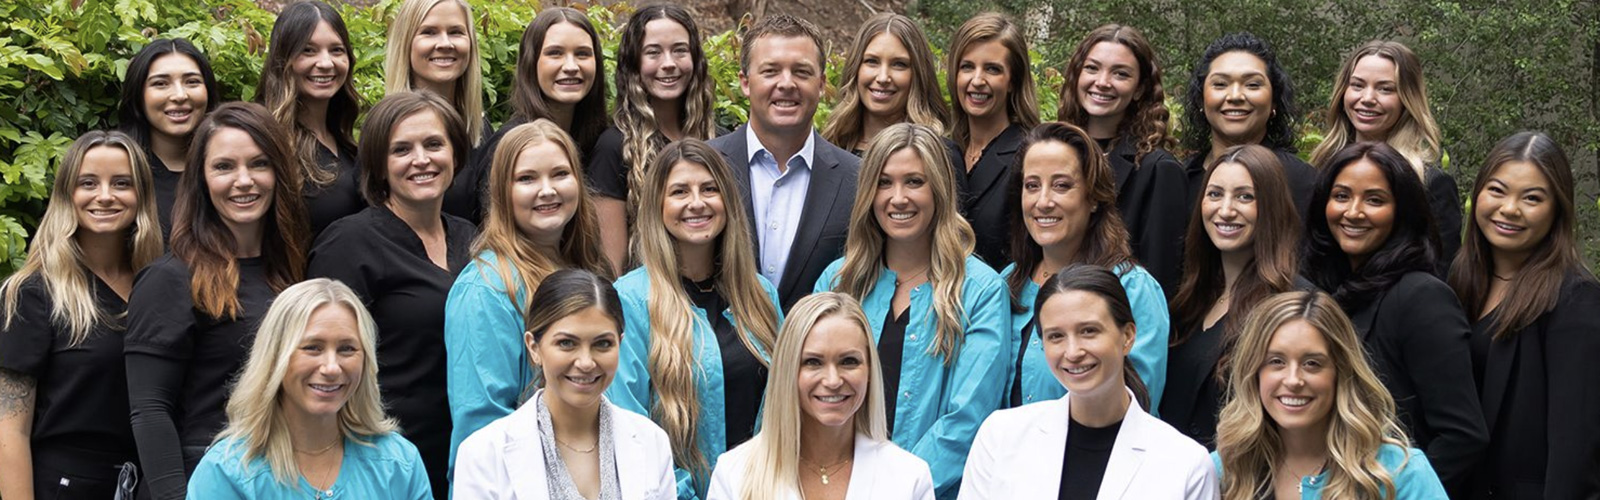 Sedation Dentistry Is the Key to Success for This California Dental Practice